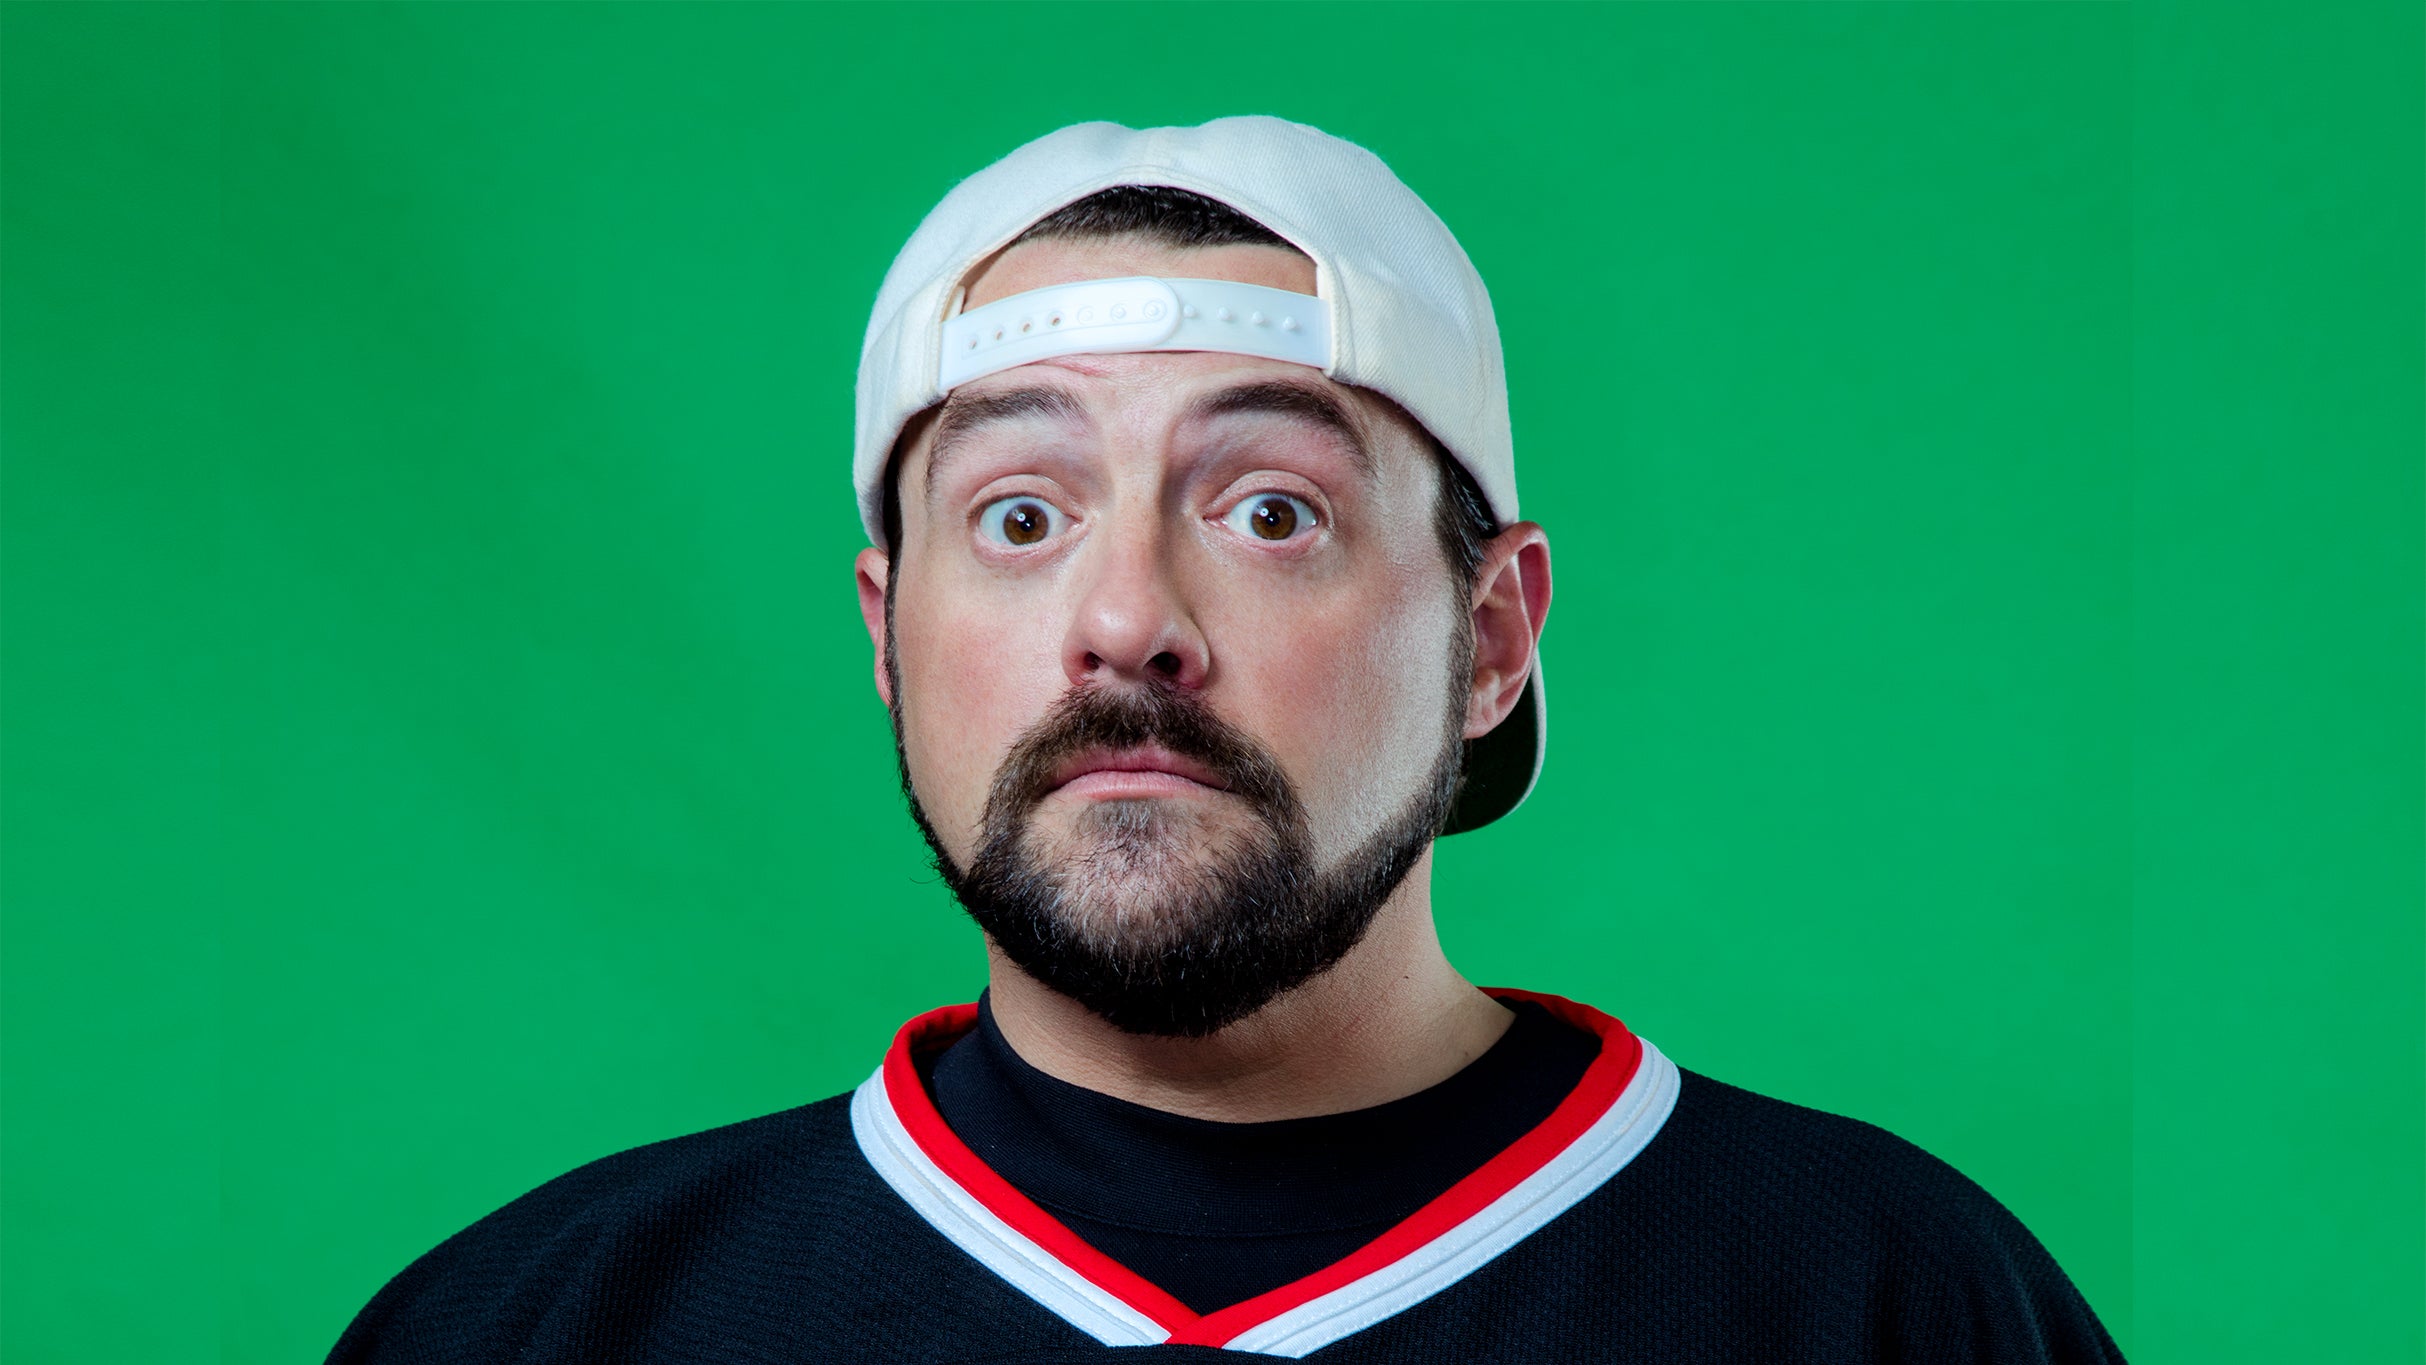 An Evening with Kevin Smith presale c0de